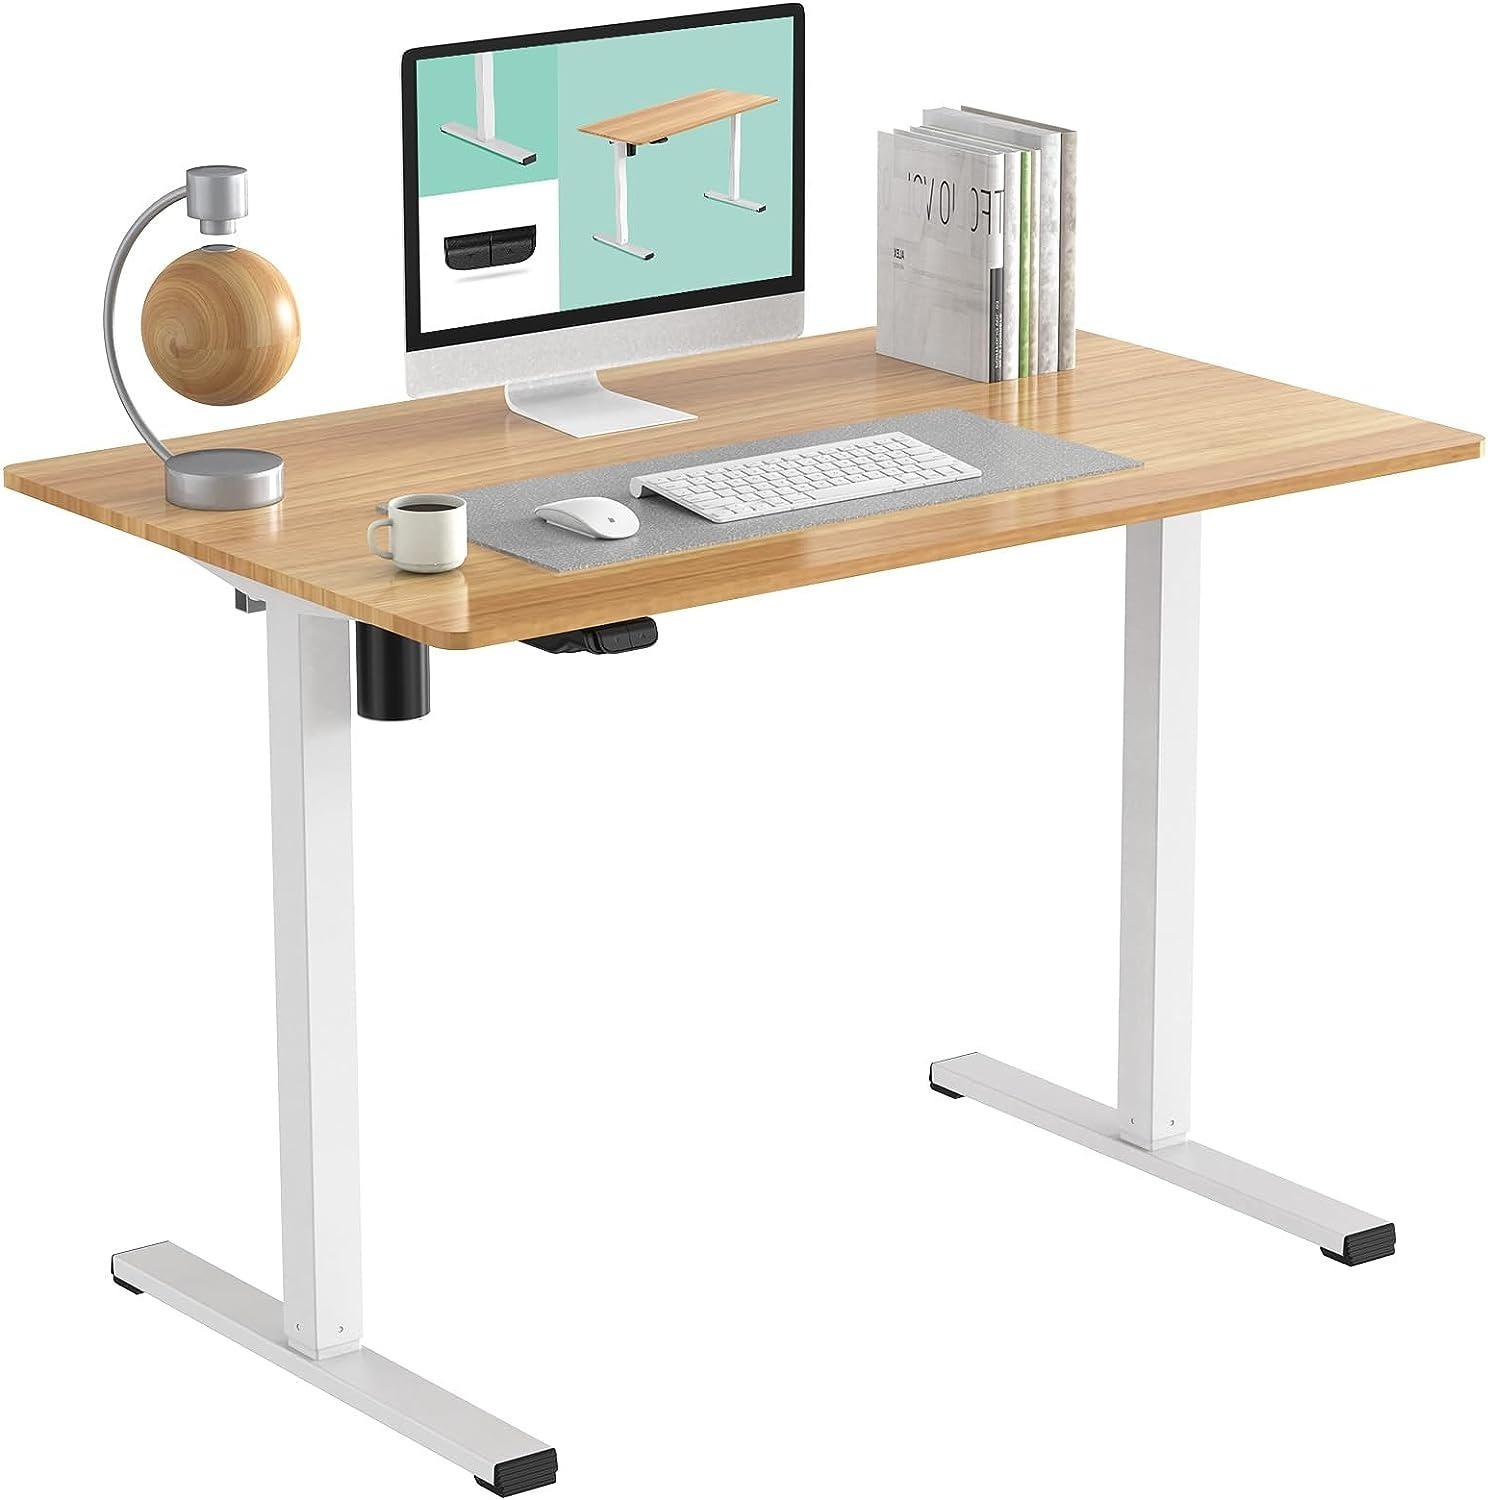 48" x 24" Flexispot Whole-Piece Electric Standing Desk (White Frame + Maple Top) $129.59 + Free Shipping